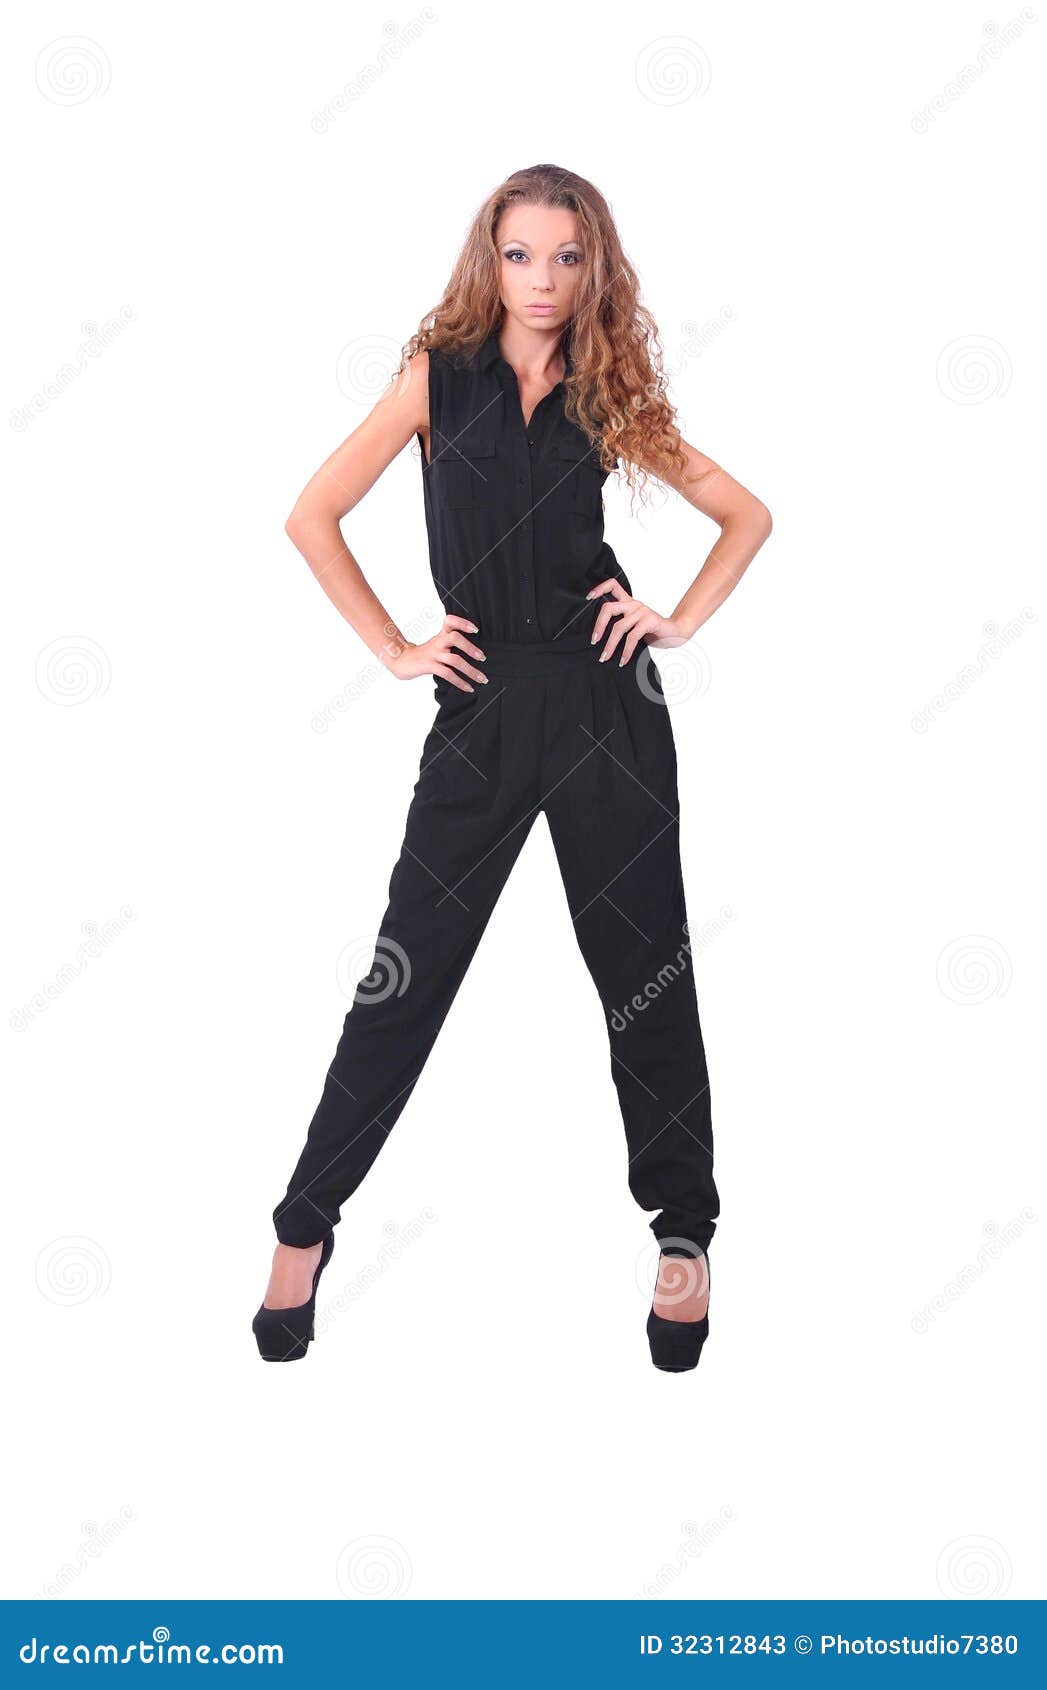 Girl in overalls stock image. Image of black, fashion - 32312843